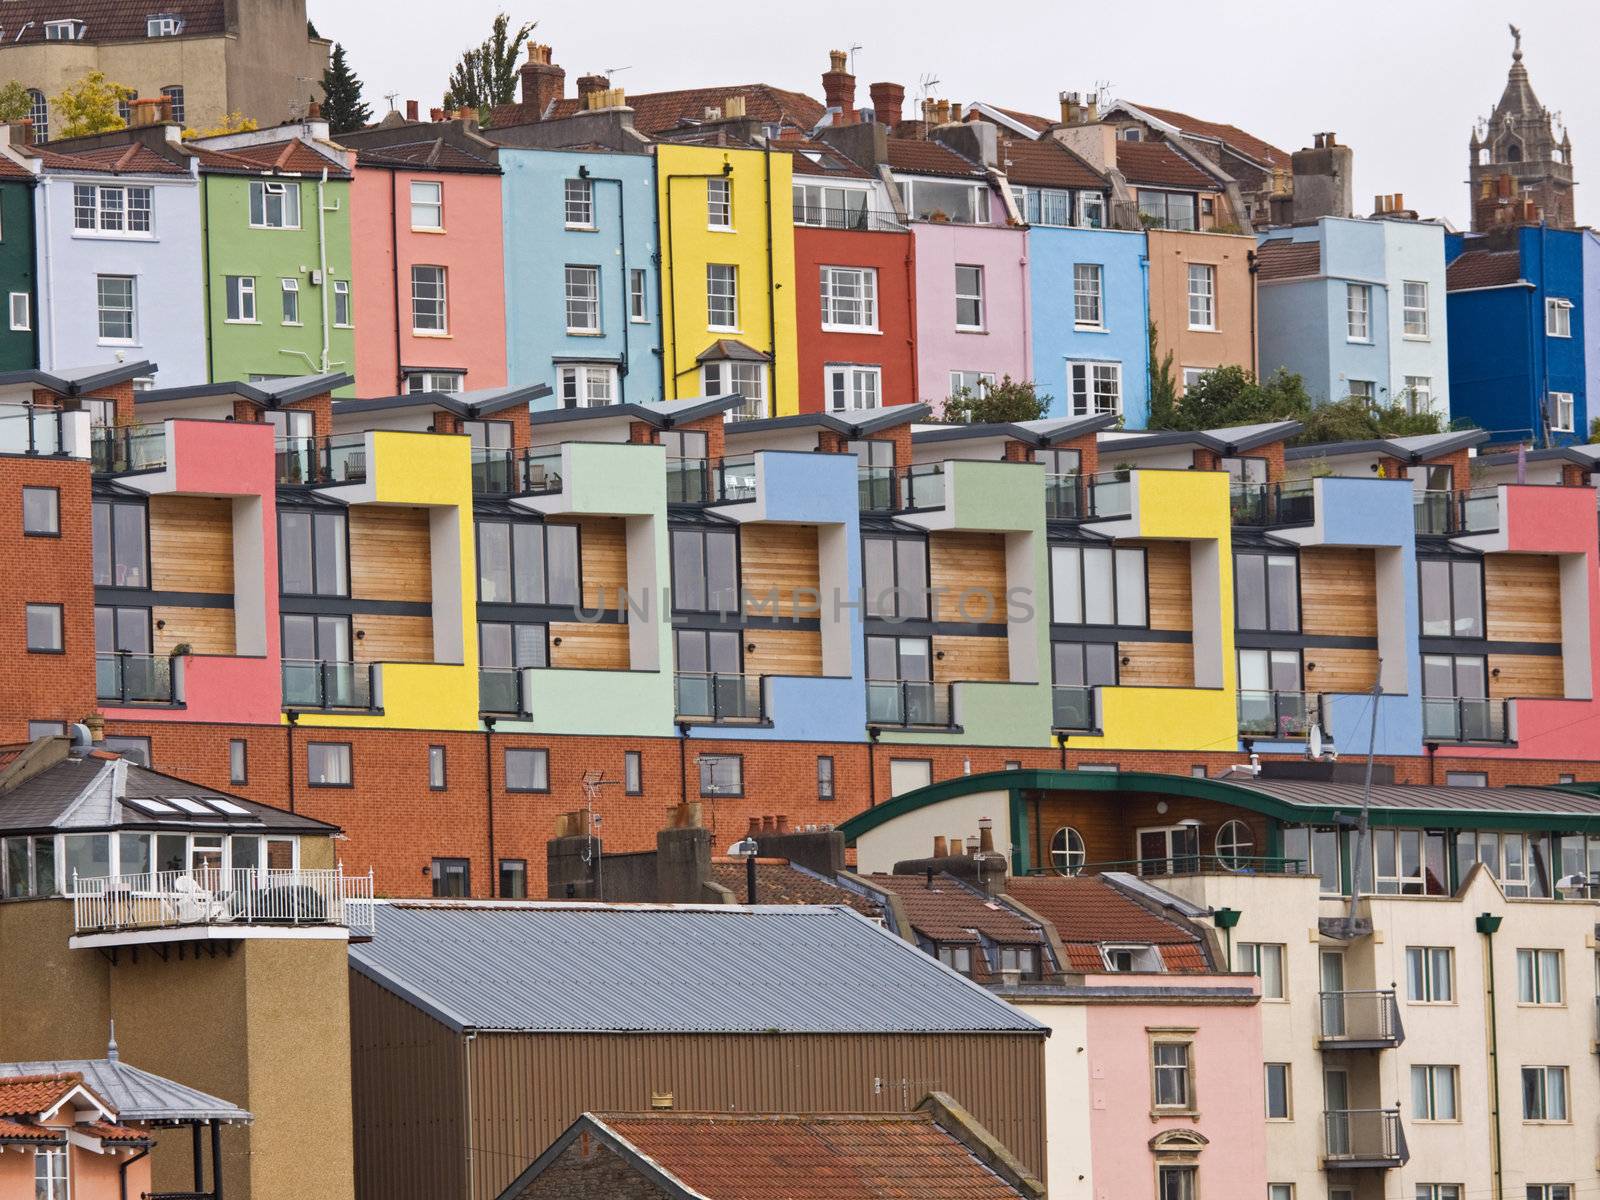 Colourful mix of old and new housing overlooking Bristol harbour